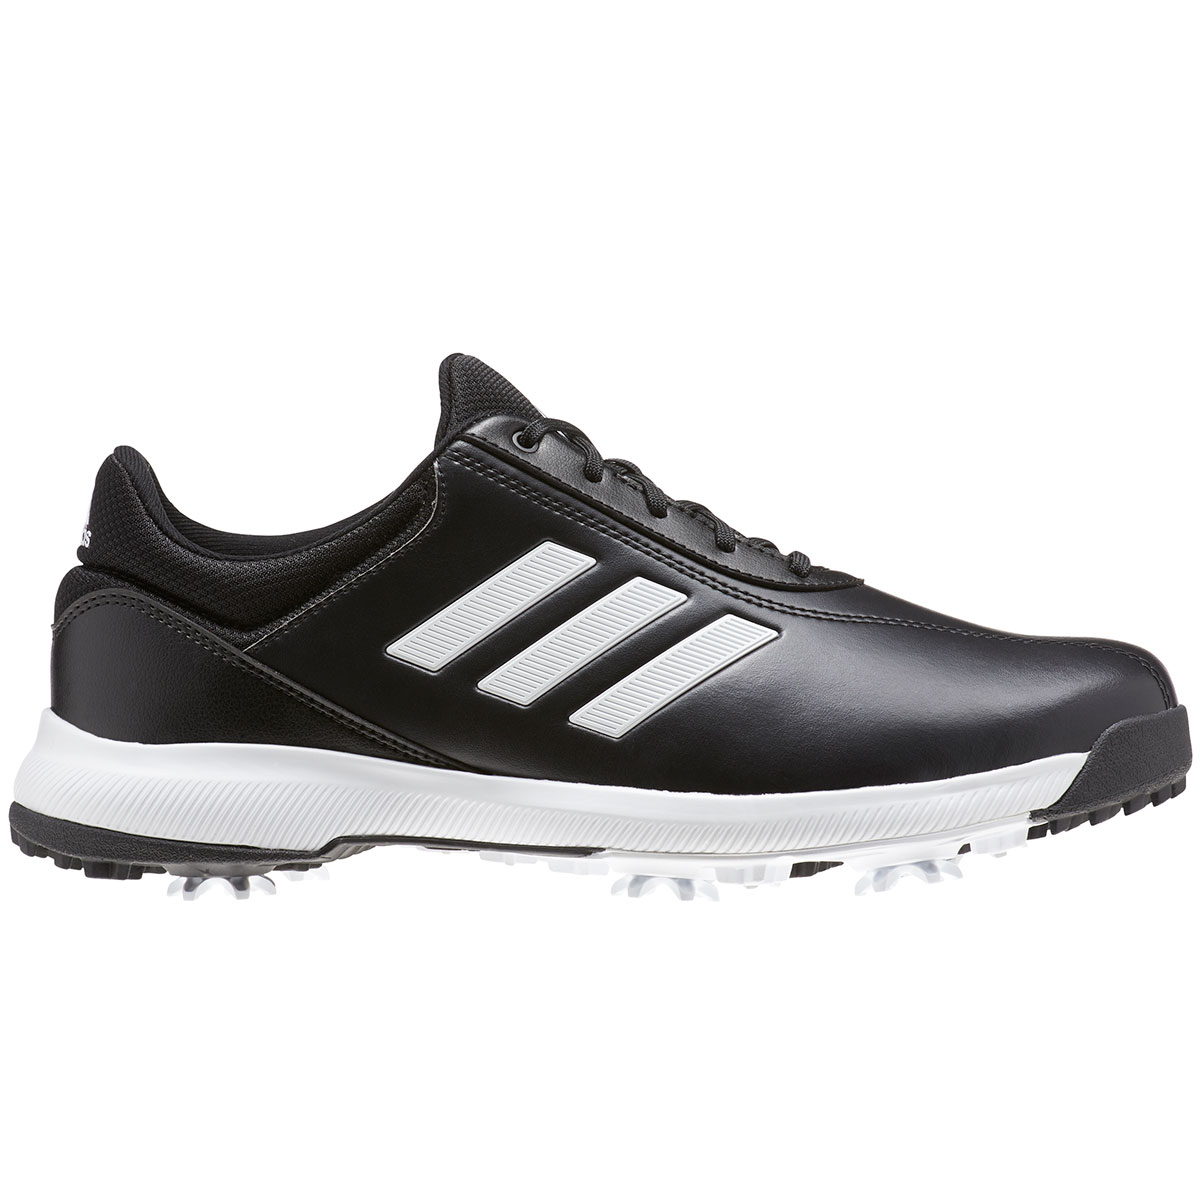 Naufragio Auckland África adidas Men's Traxion Lite Waterproof Spiked Golf Shoes from american golf